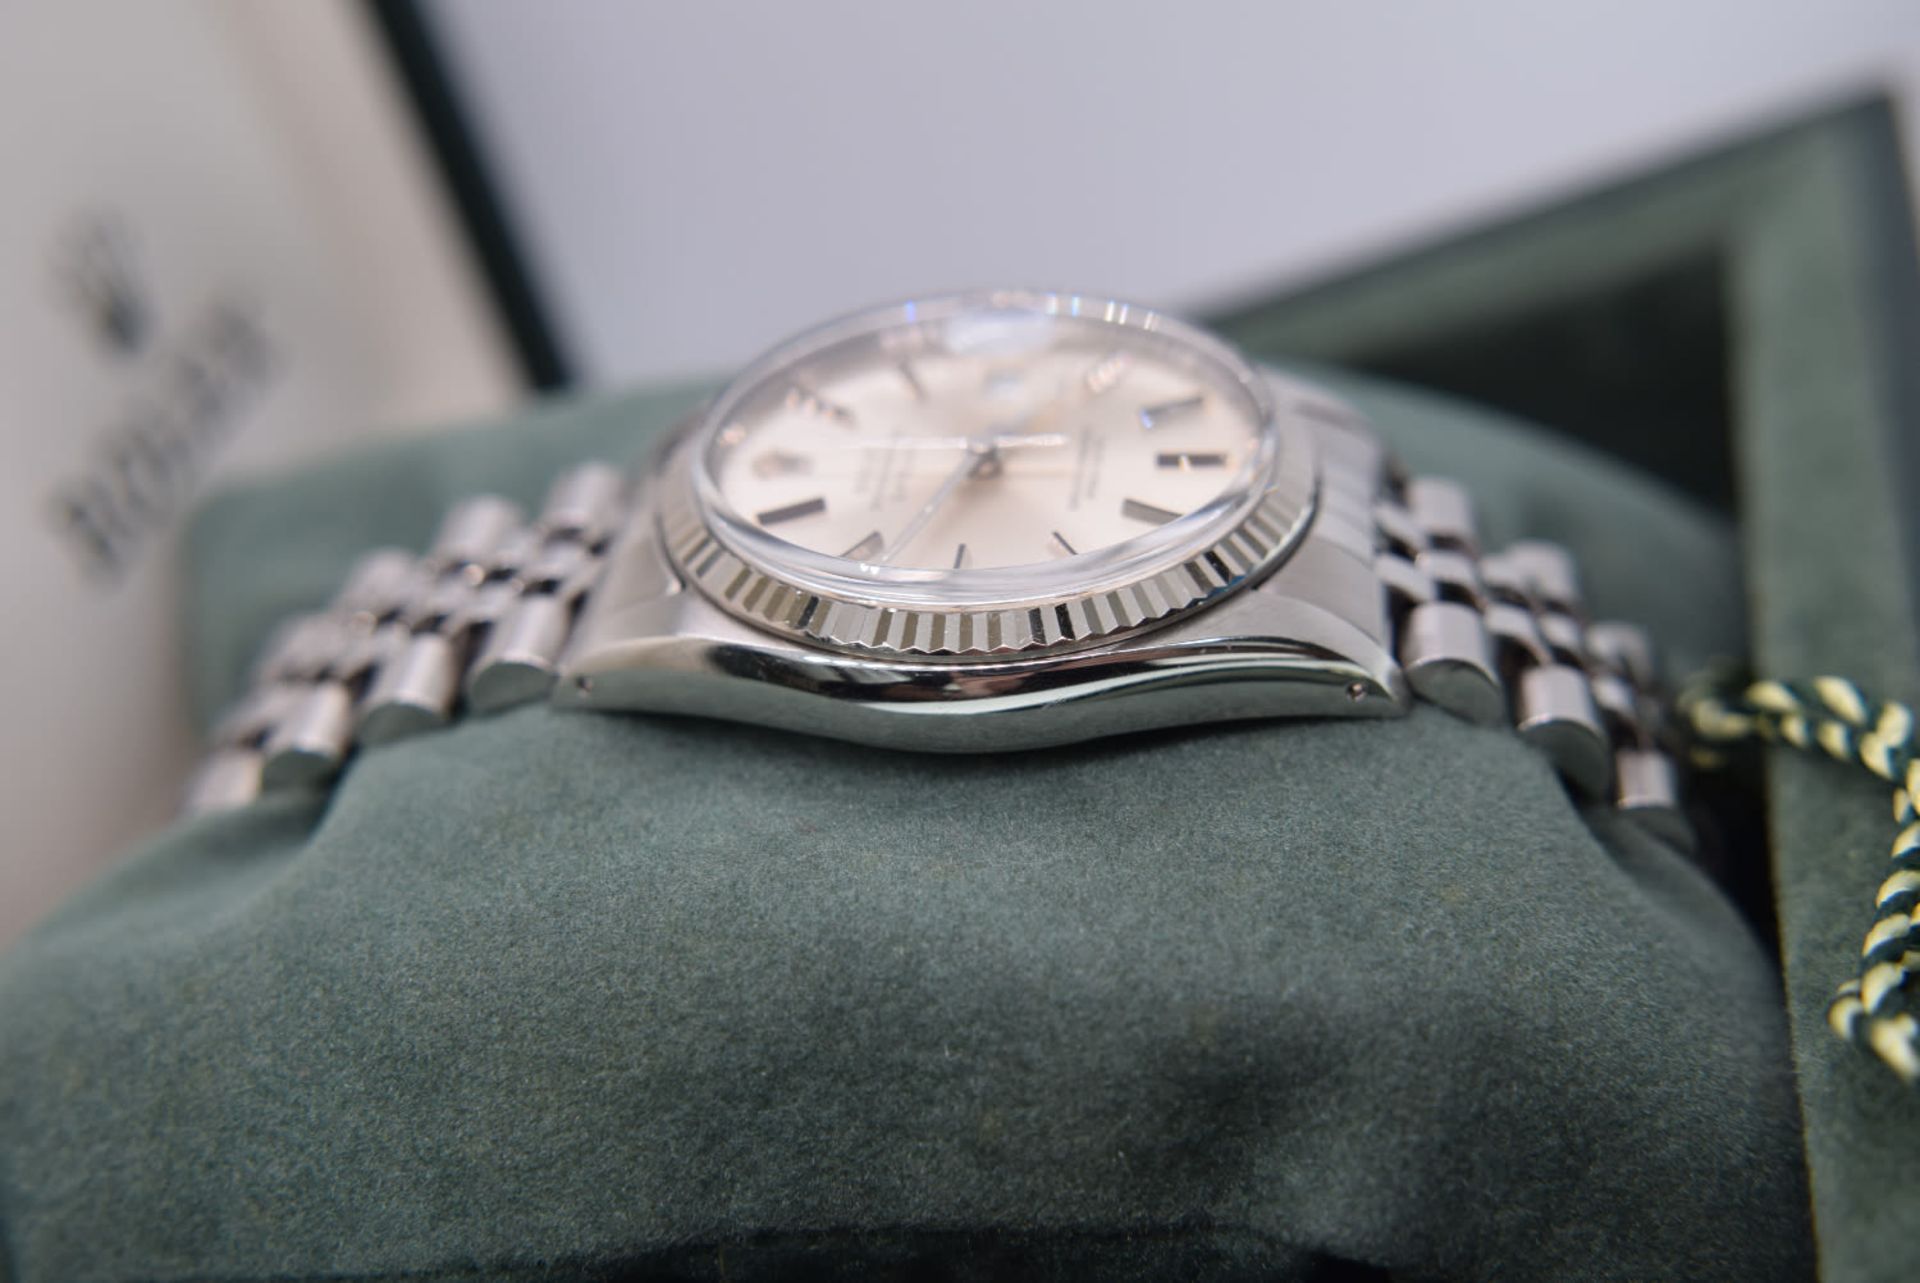 ROLEX DATEJUST 36MM STAINLESS STEEL MODEL WITH JUBILEE BRACELET (SILVER DIAL, FLUTED BEZEL) - Image 4 of 8